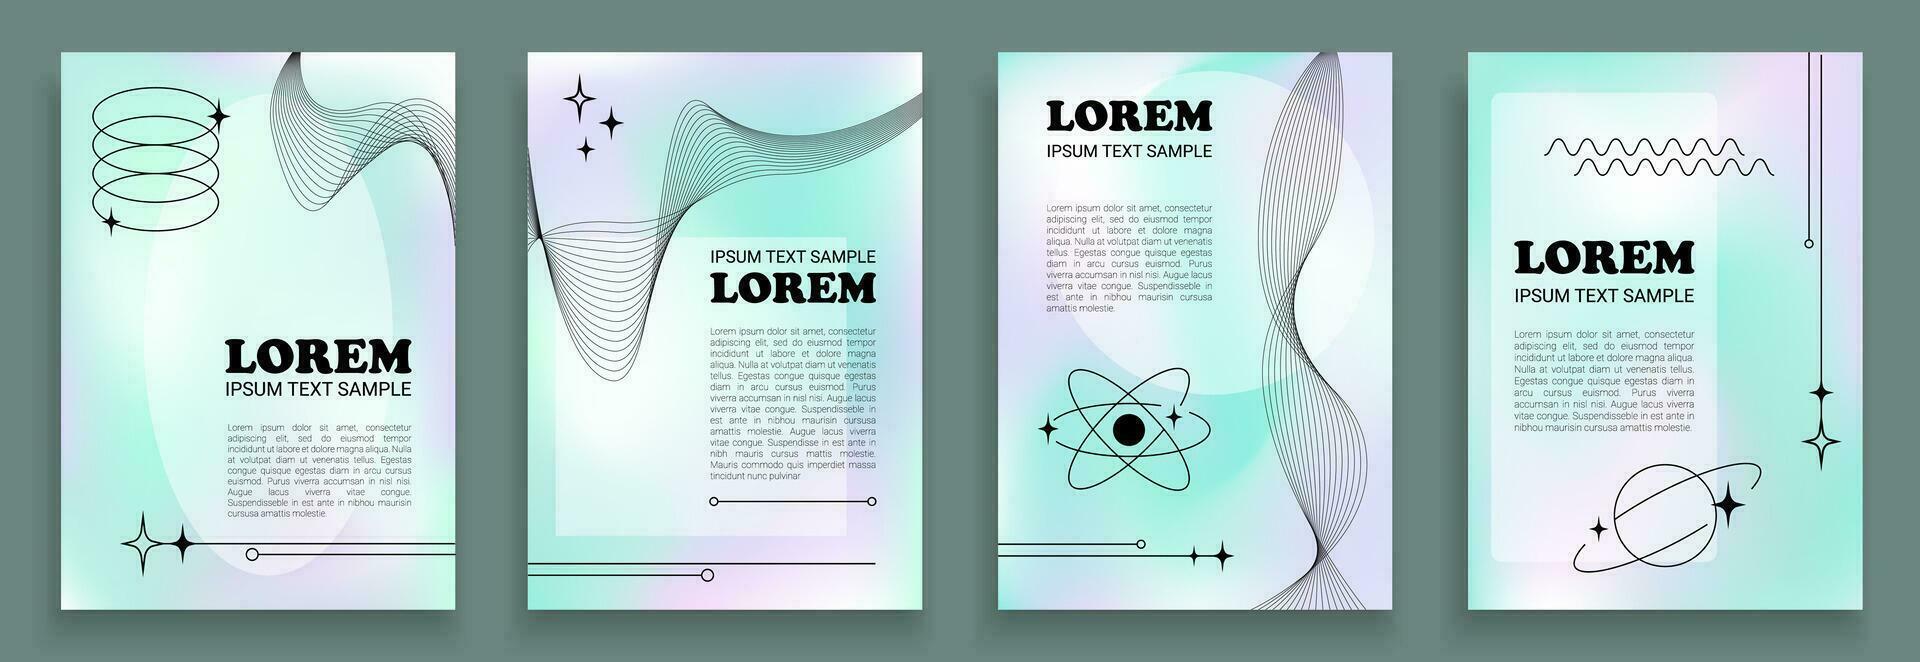 Abstract 2000s aesthetic backgrounds with Lorem Ipsum text vector